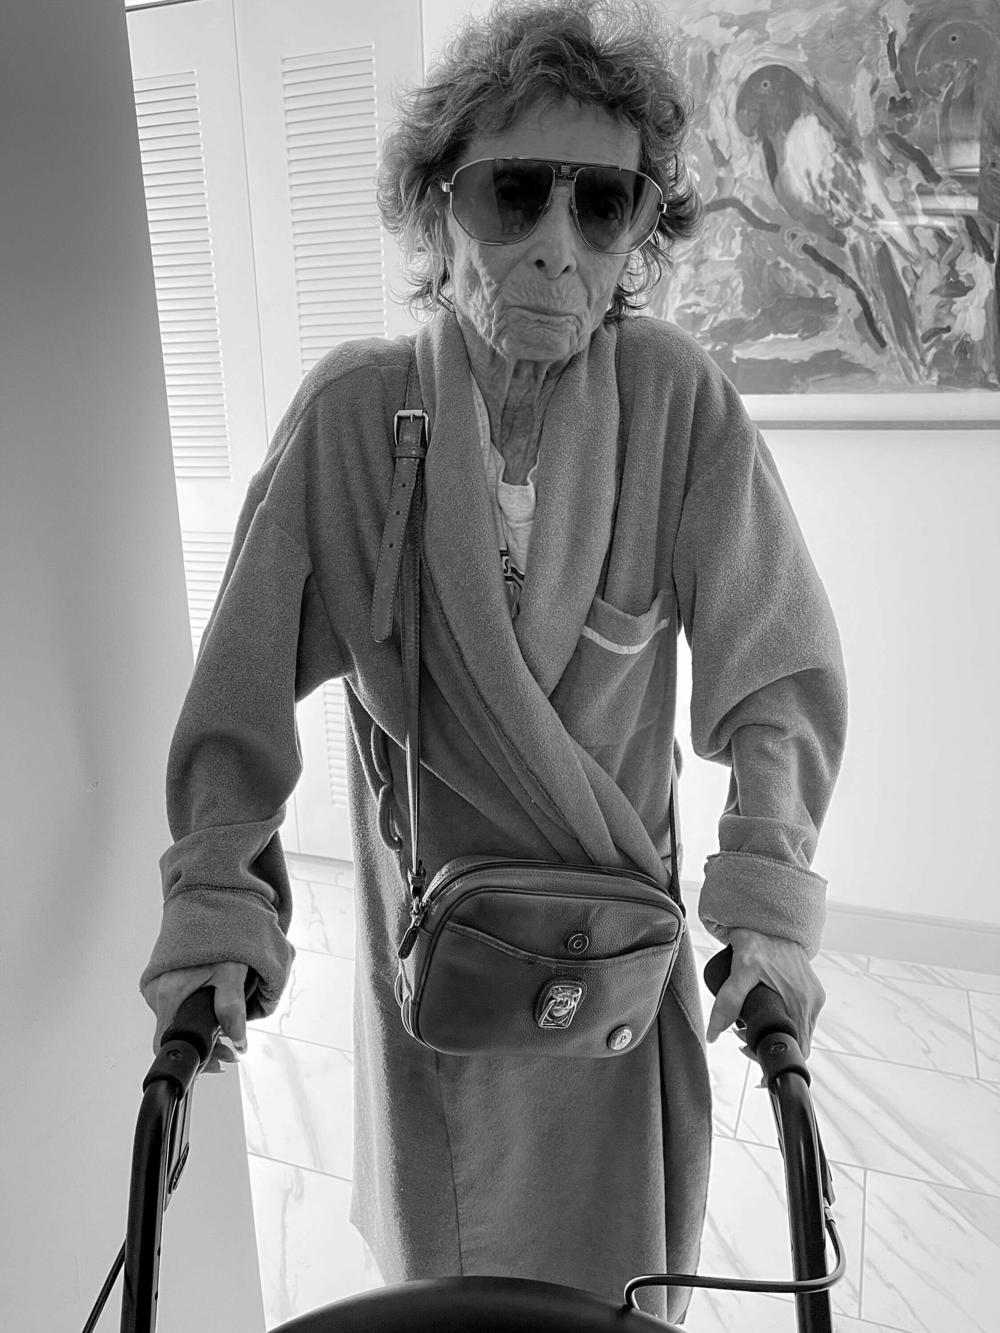 Audrey two weeks before her passing. She would often get confused and put on her sunglasses and purse to go out. Aventura, Miami, Fla., March, 2021.